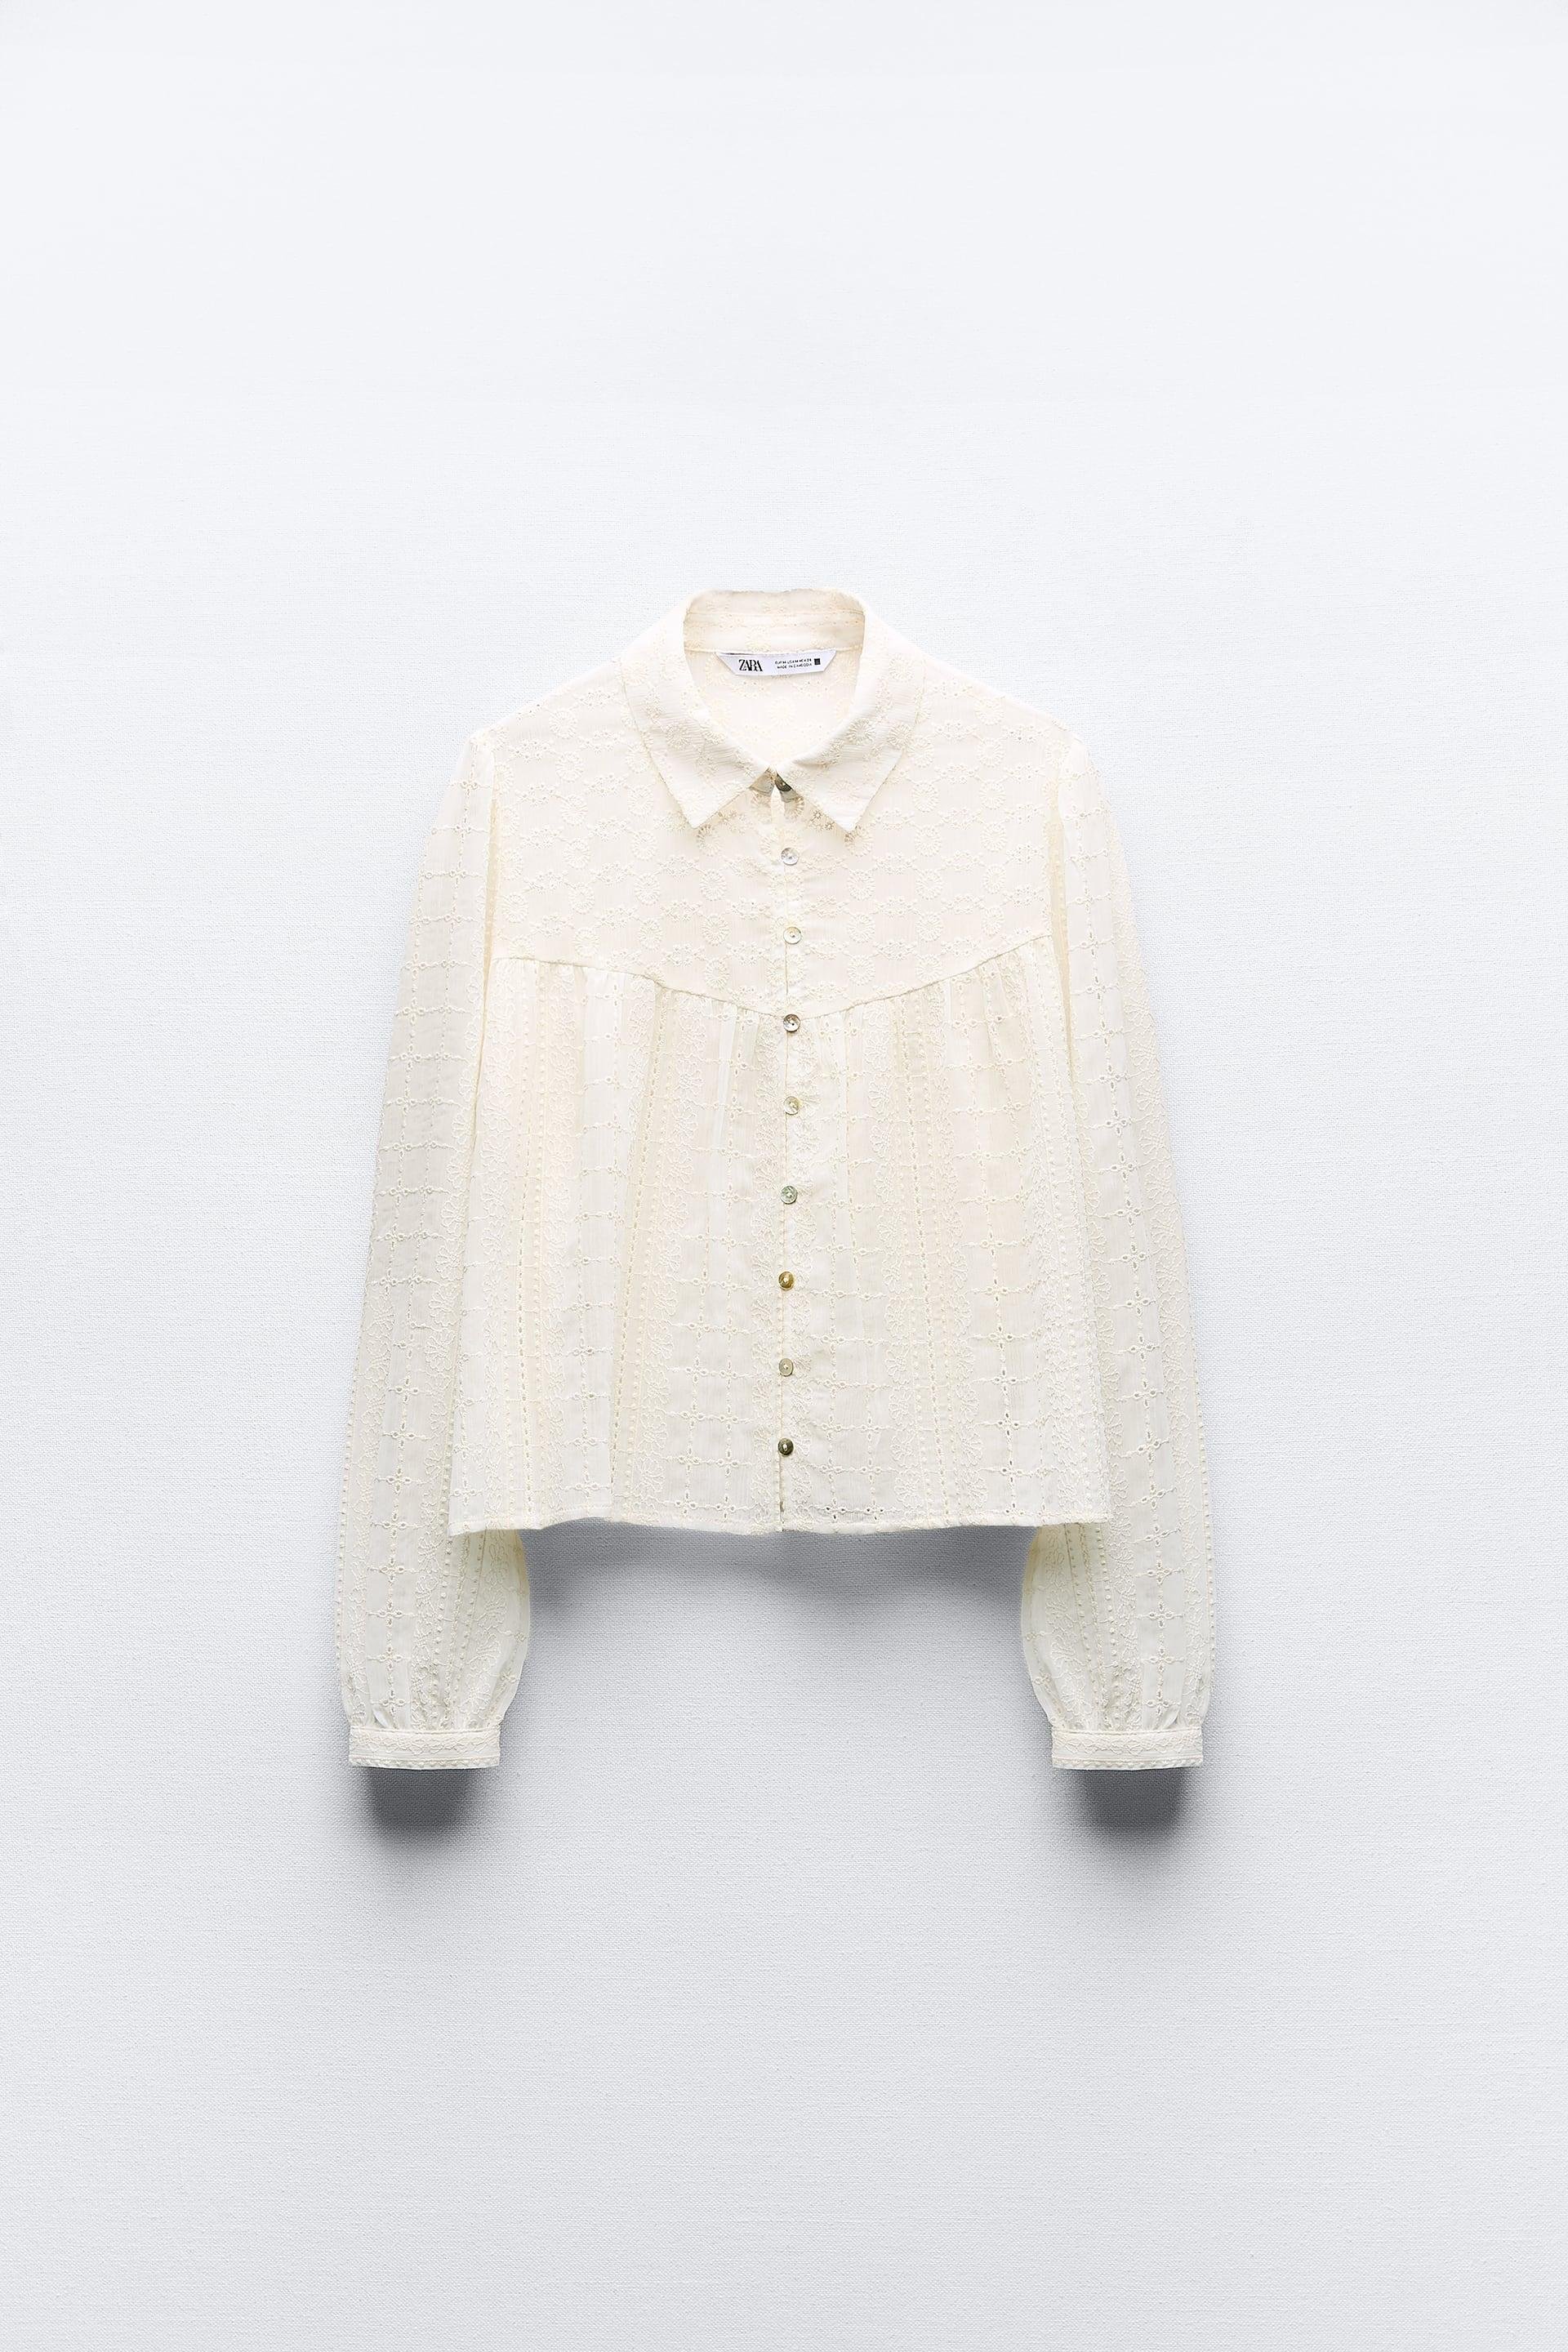 EMBROIDERED EYELET BLOUSE by ZARA